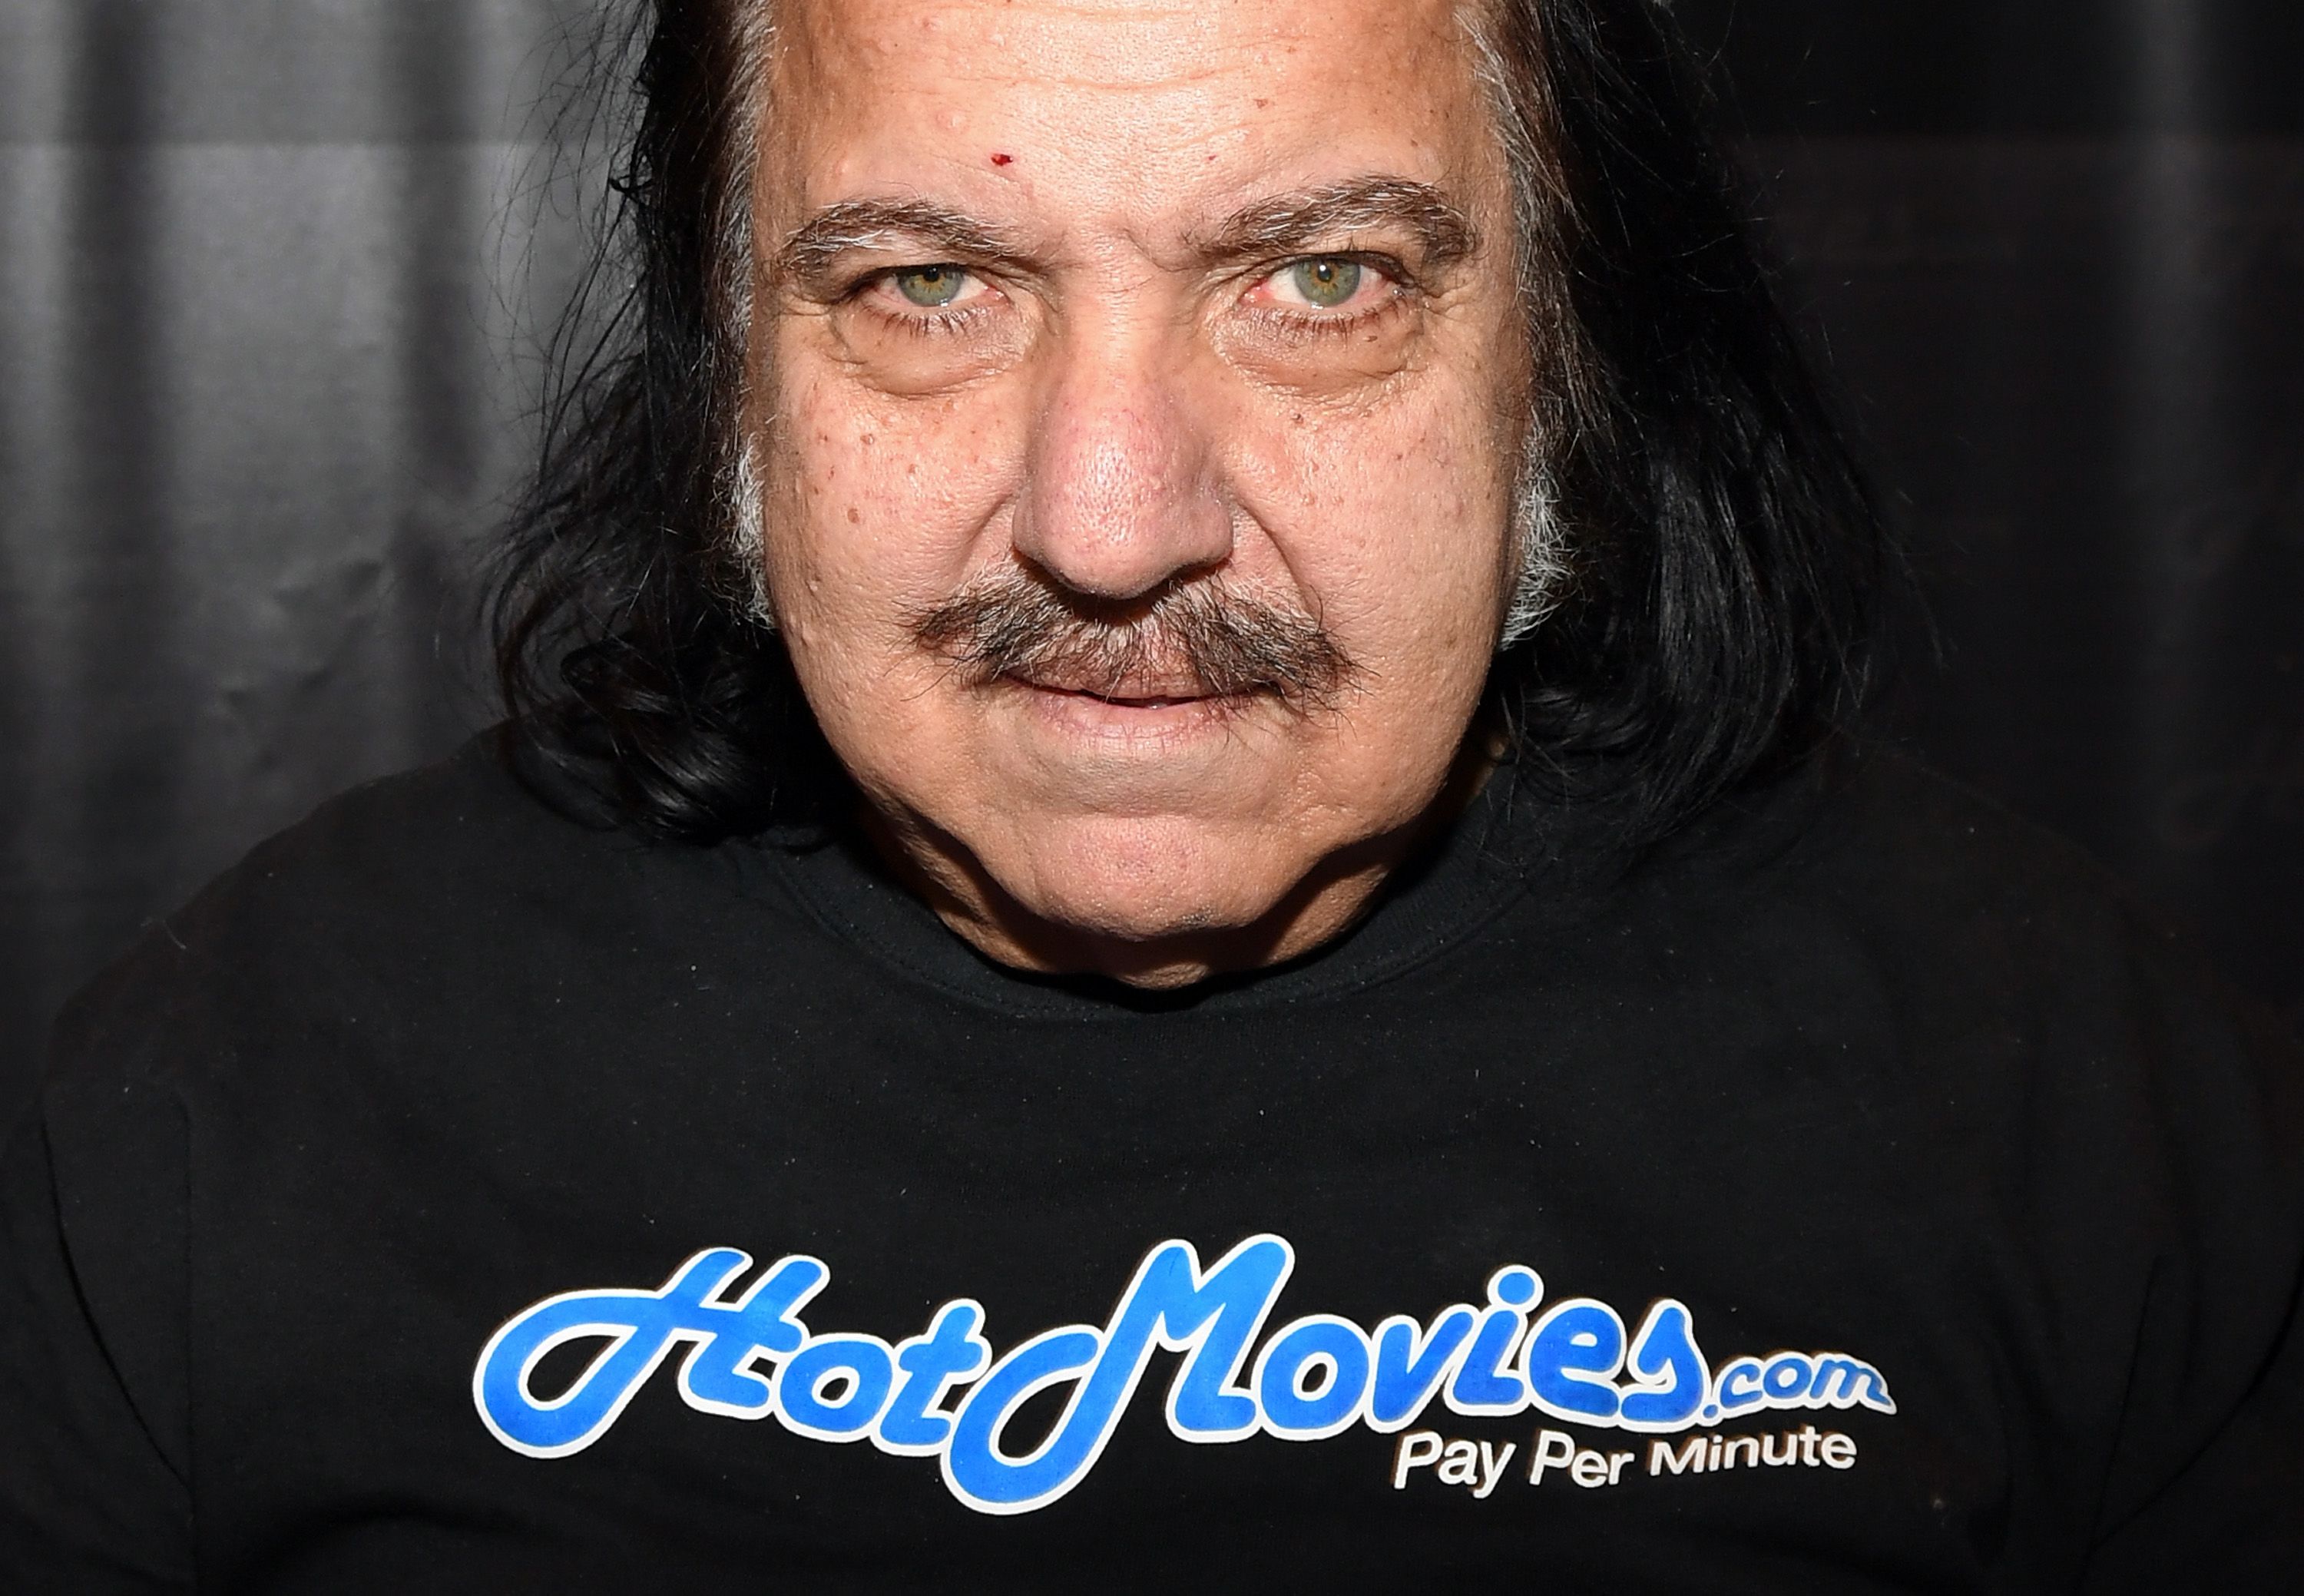 Rafe Xxx - Porn star Ron Jeremy faces 20 more sexual assault charges | CNN